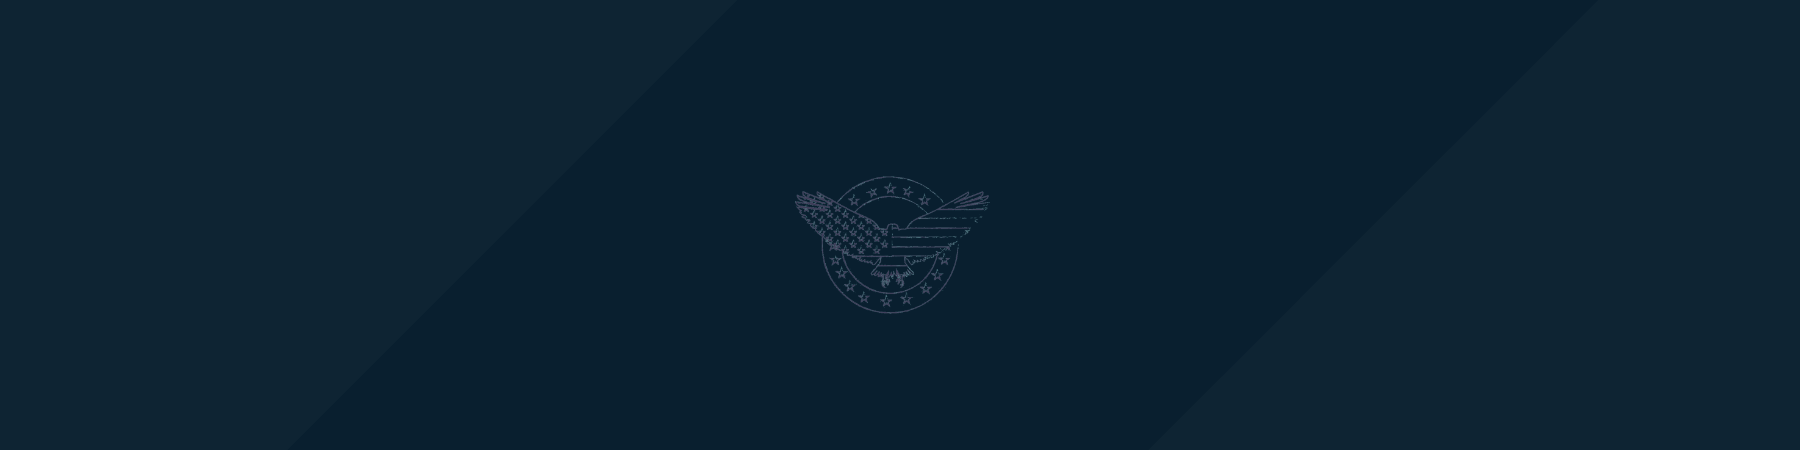 American eagle with American flag print on dark blue background